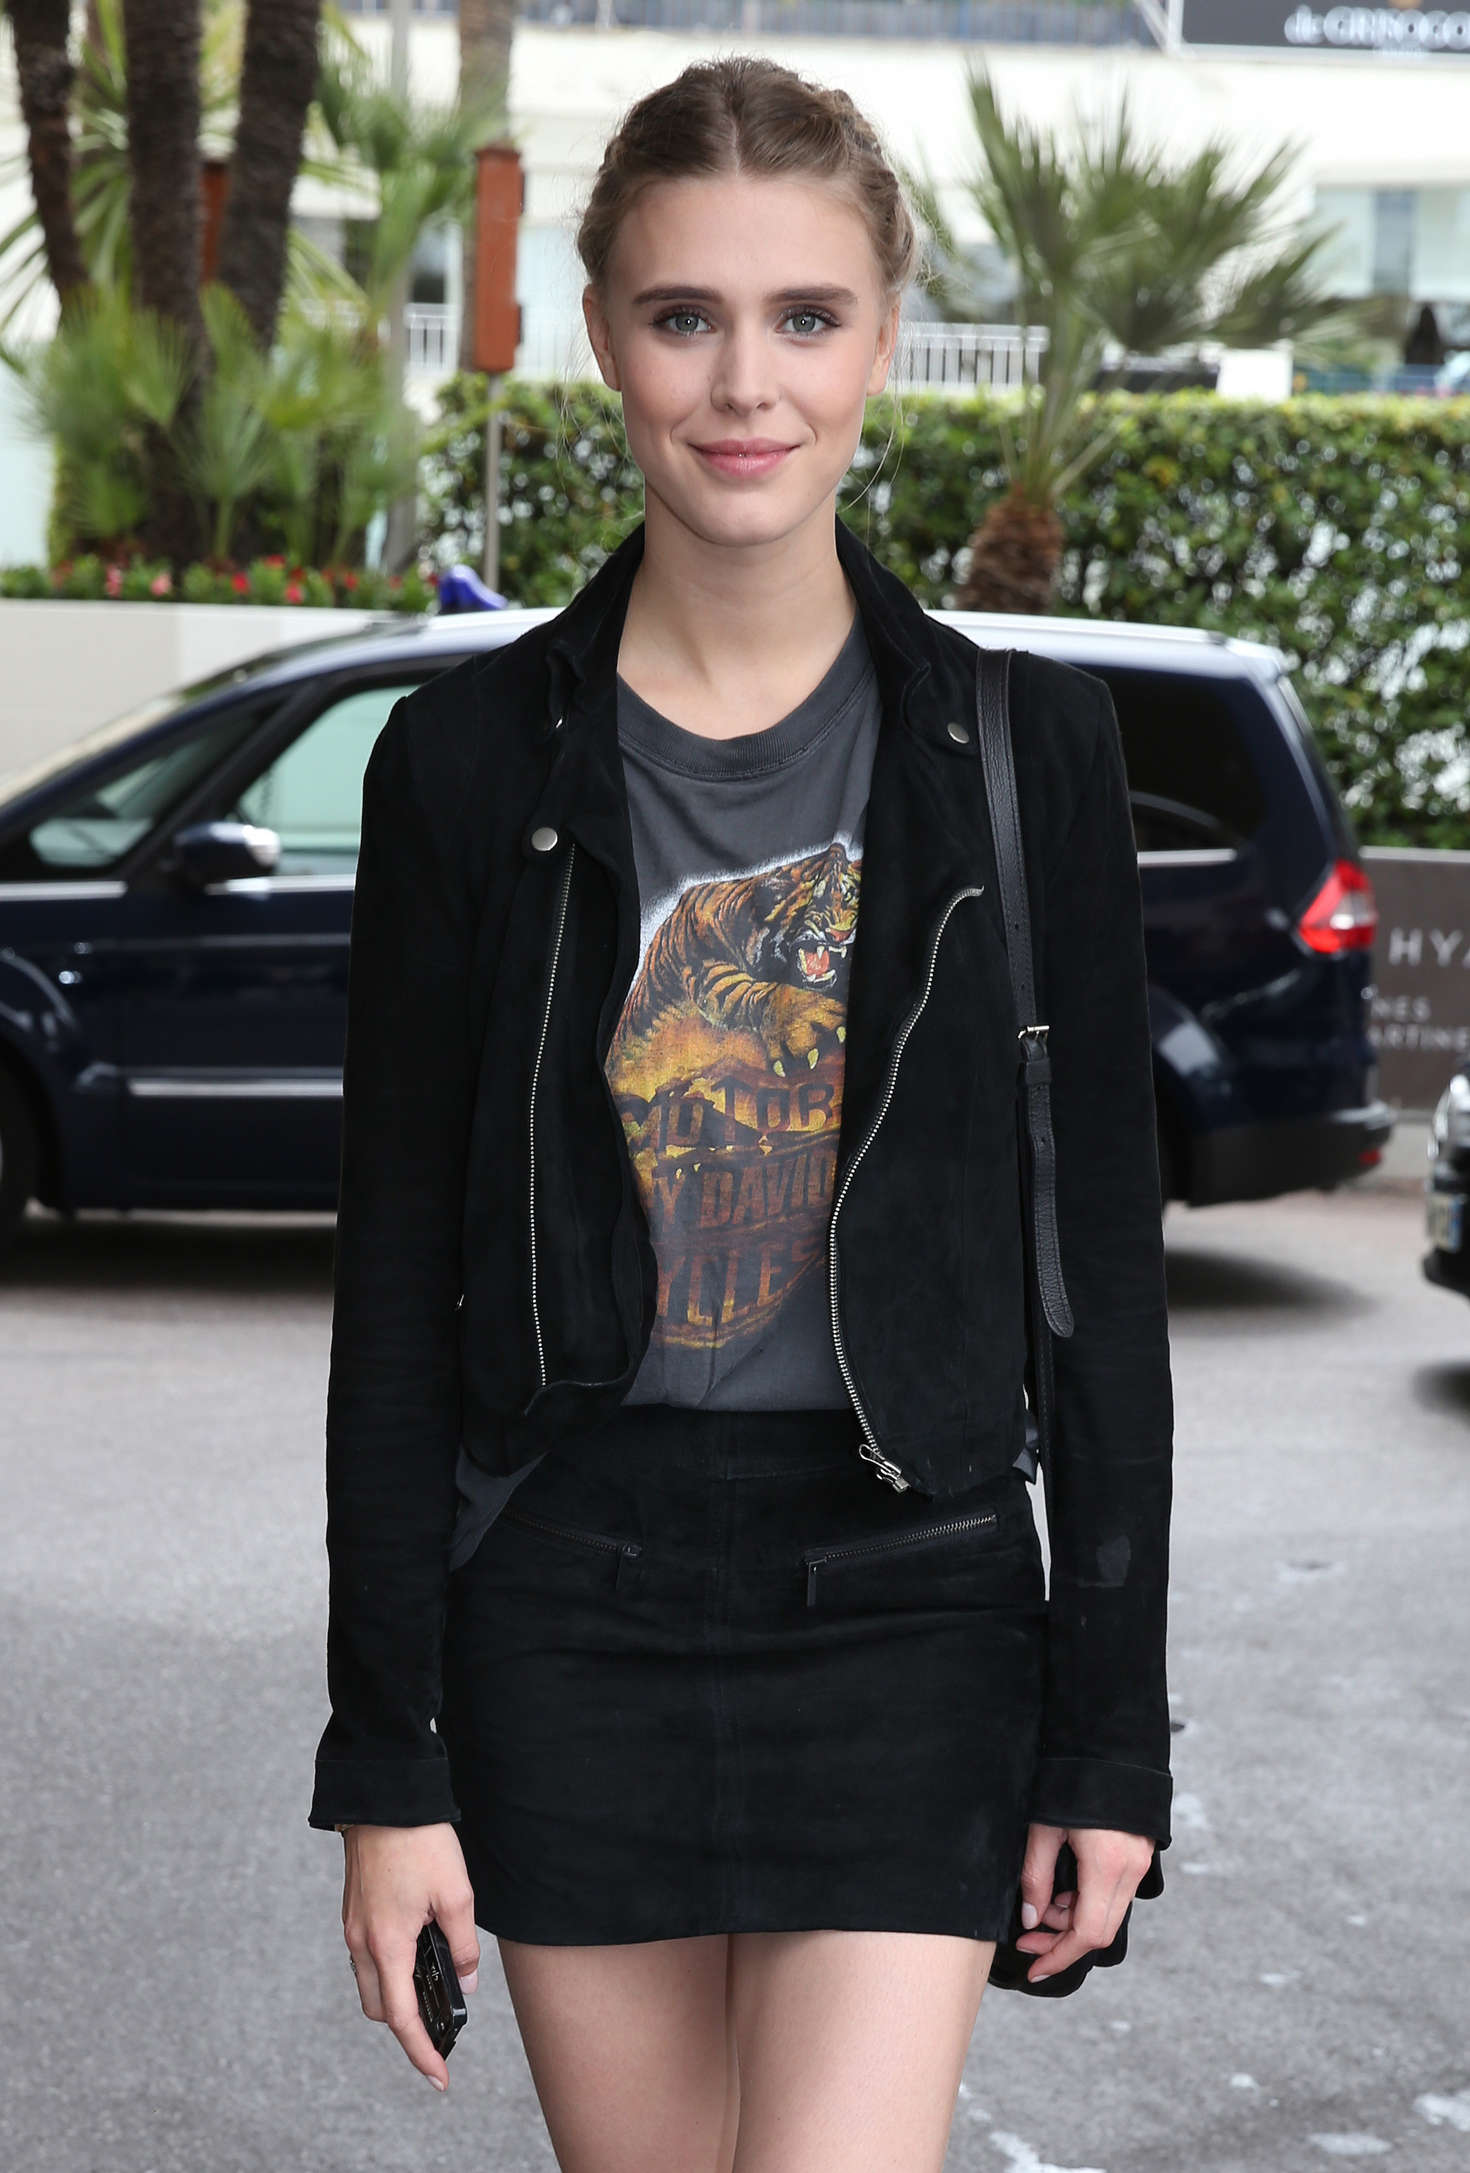 Gaia Weiss at Martinez Hotel in Cannes | GotCeleb